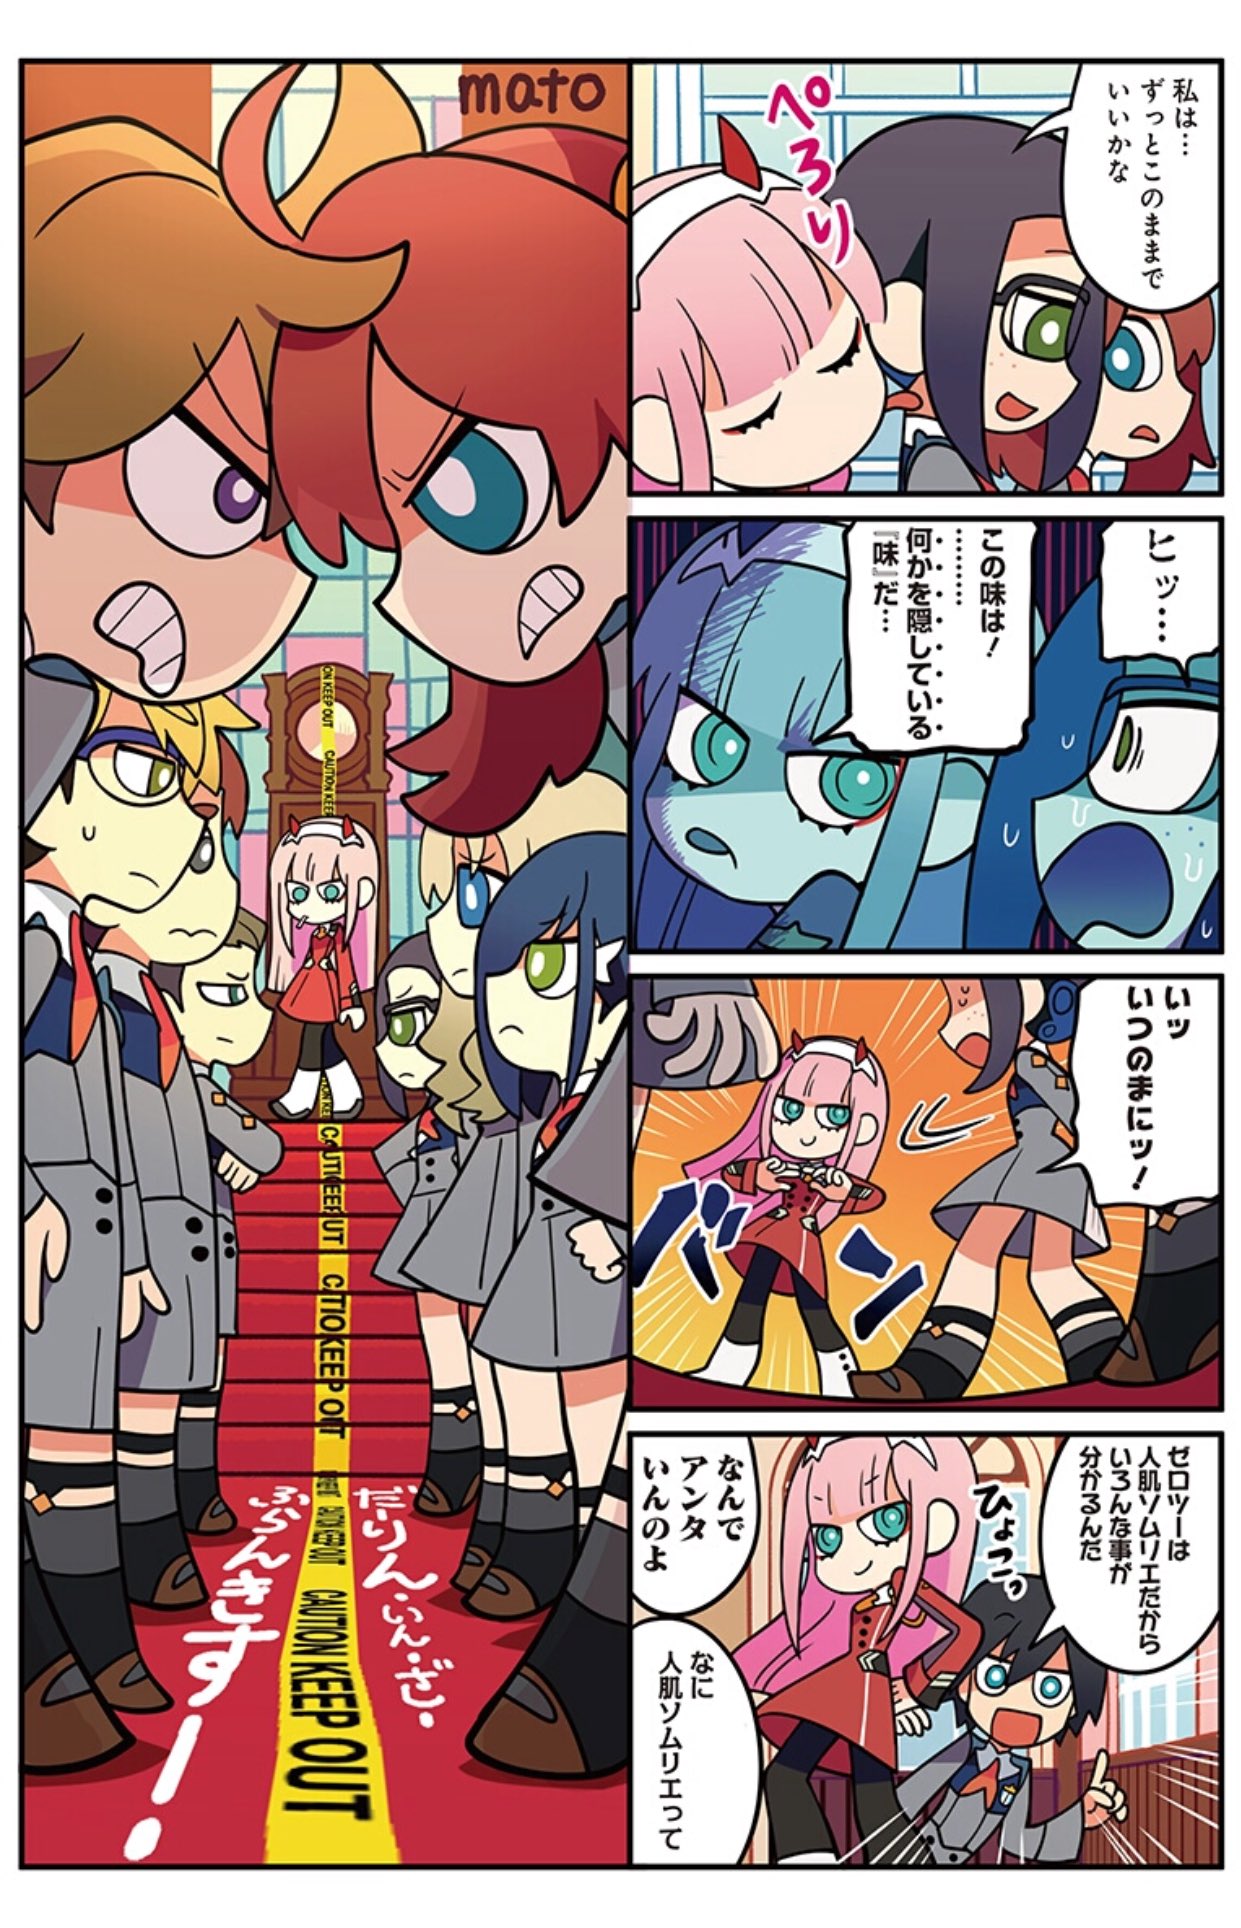 4koma 5boys 5girls black_hair blonde_hair blue_eyes blue_hair boots bright_pupils brown_hair candy caution_tape clenched_teeth comic darling_in_the_franxx dress food freckles futoshi_(darling_in_the_franxx) gorou_(darling_in_the_franxx) green_eyes grey_eyes hairband highres hiro_(darling_in_the_franxx) ichigo_(darling_in_the_franxx) ikuno_(darling_in_the_franxx) index_finger_raised keep_out kokoro_(darling_in_the_franxx) licking lineup lollipop mato_(mozu_hayanie) miku_(darling_in_the_franxx) mitsuru_(darling_in_the_franxx) multiple_boys multiple_girls pantyhose pink_hair platinum_blonde shorts sweatdrop teeth tongue tongue_out translation_request twintails uniform wavy_hair zero_two_(darling_in_the_franxx) zorome_(darling_in_the_franxx)